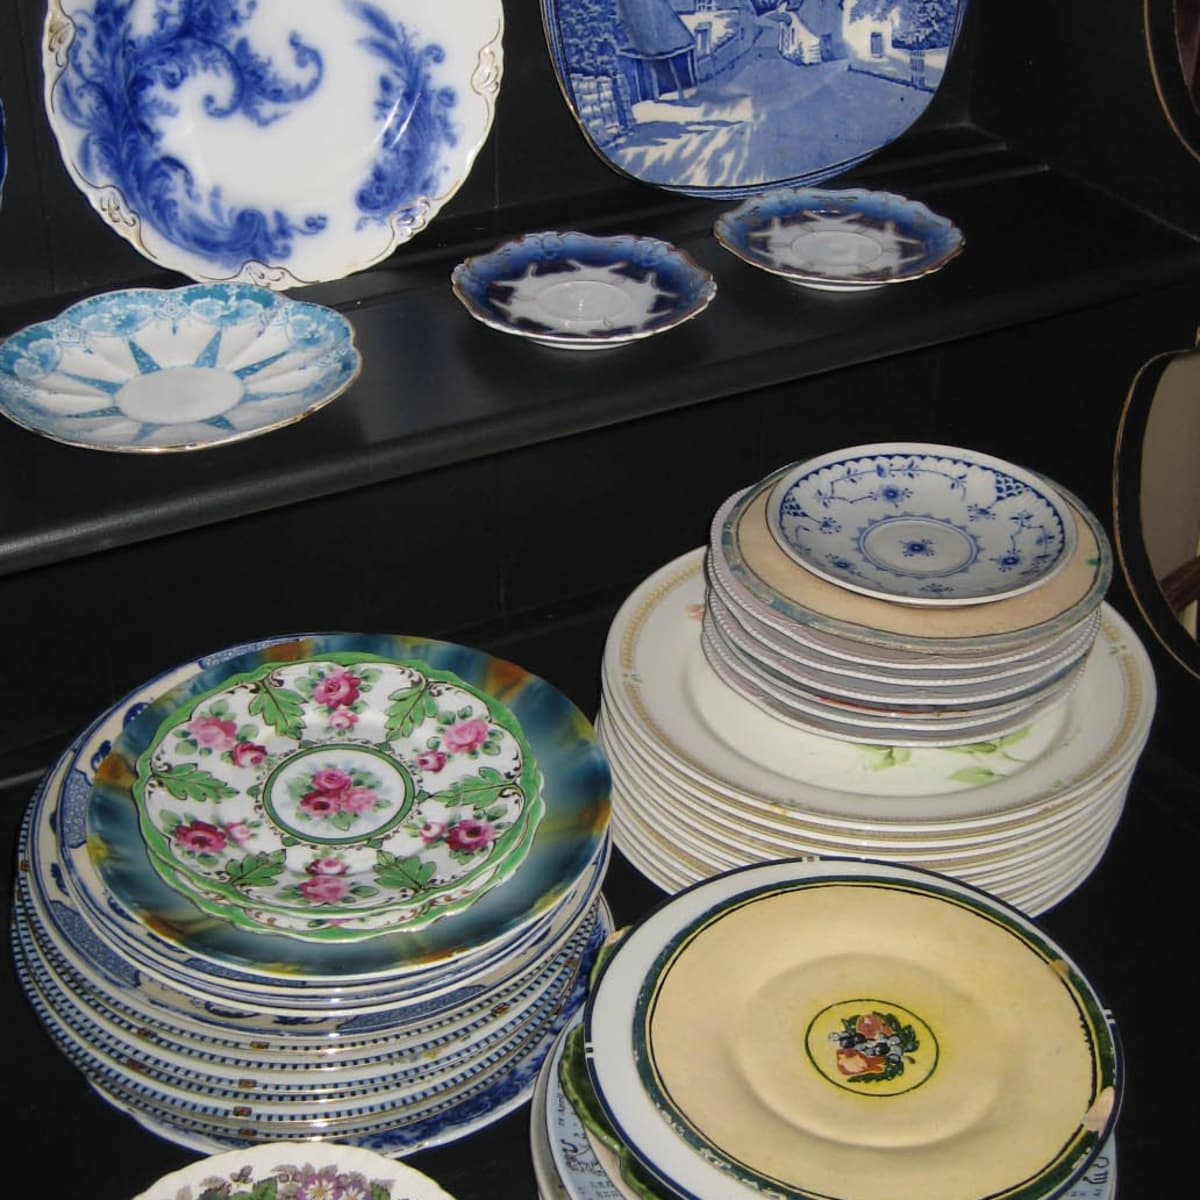 China marks made in vintage Porcelain and